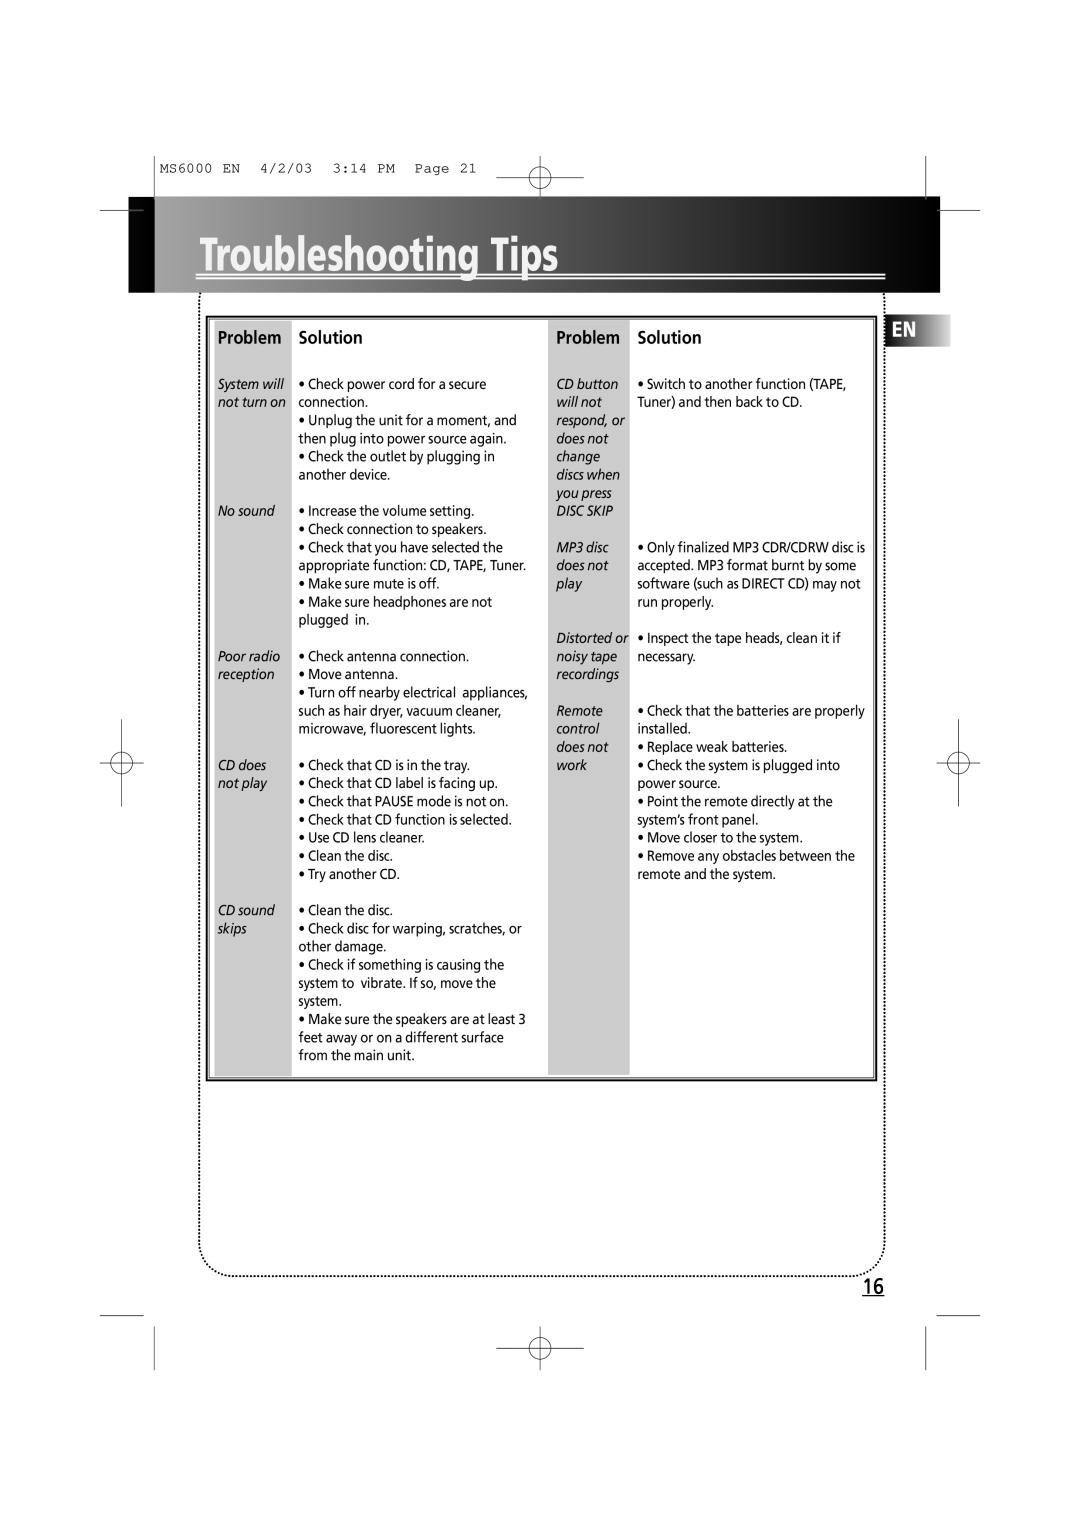 Technicolor - Thomson MS6000 manual Troubleshooting Tips, Problem, Solution 